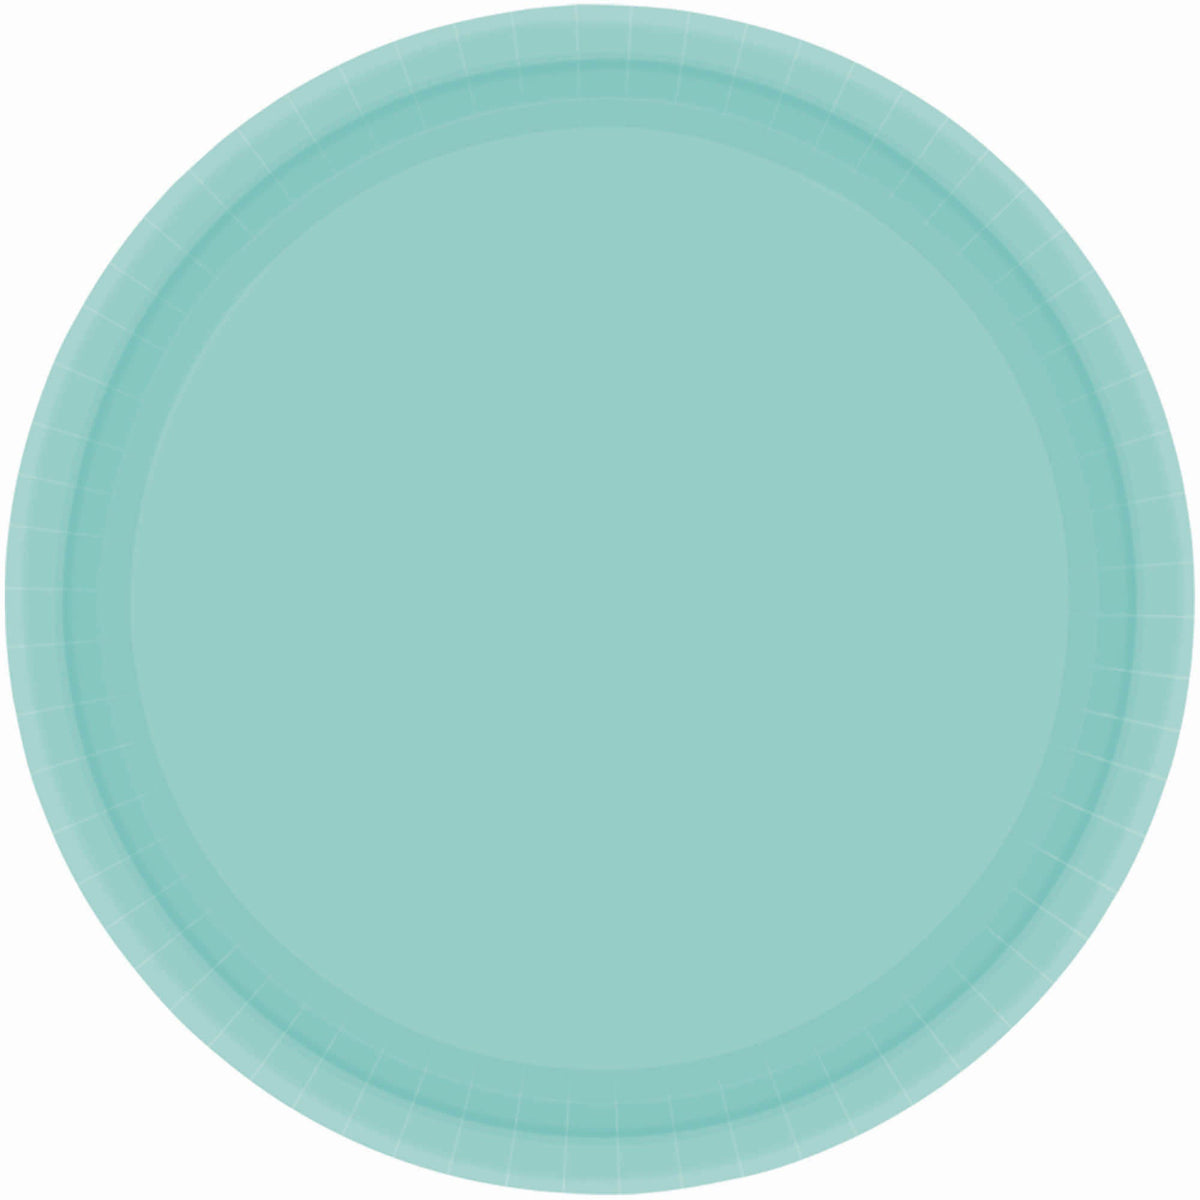 Robin's Egg Blue 9" Round Paper Plates, 20 count